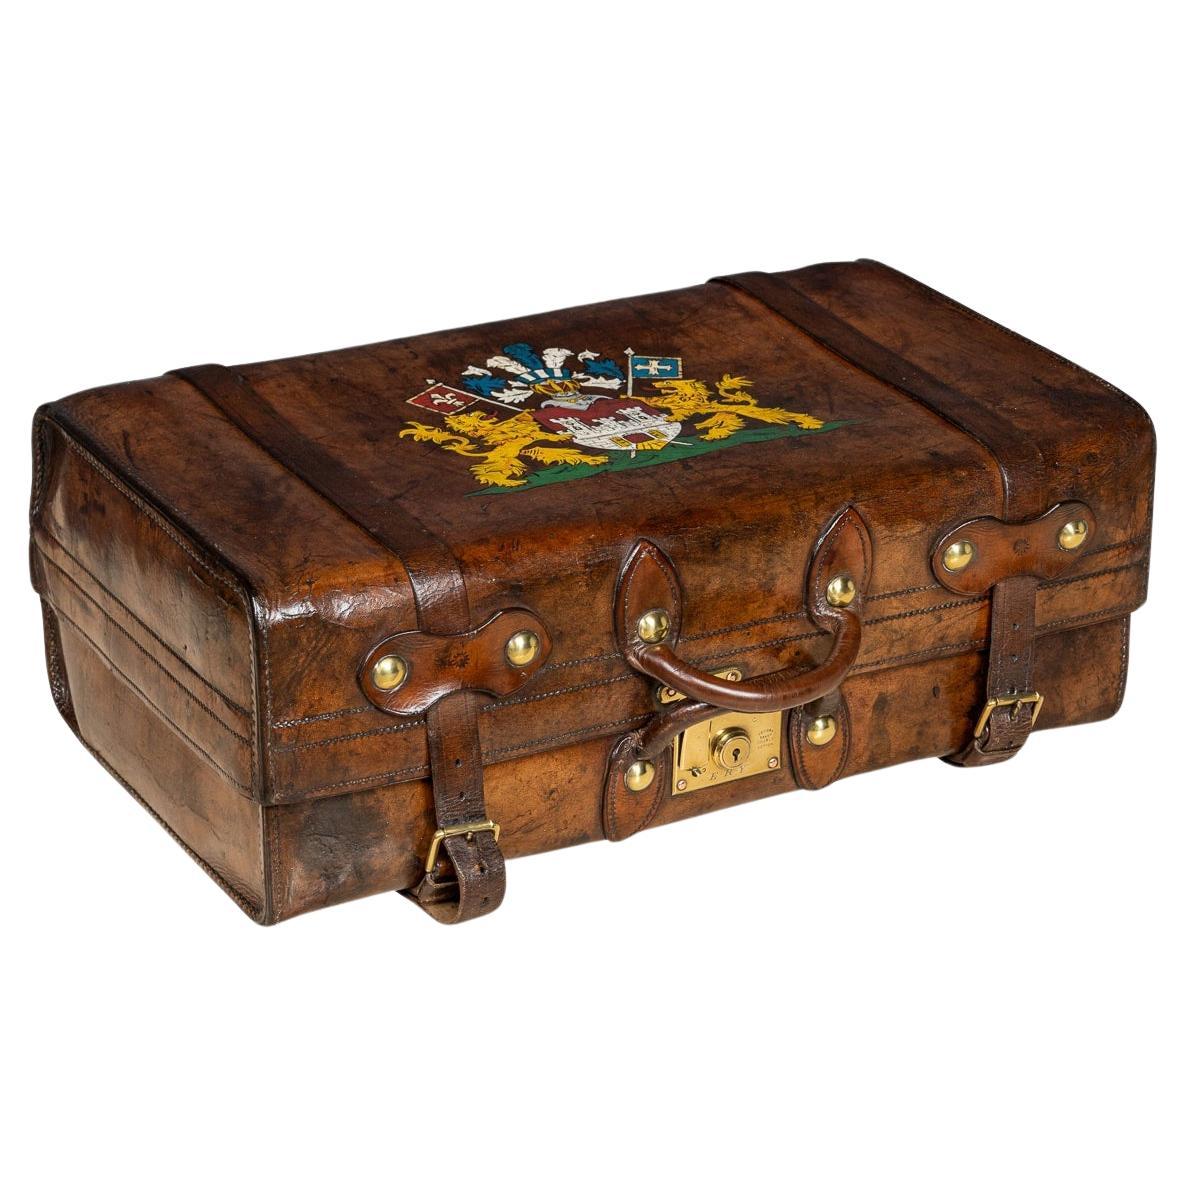 Antique 19th Century Victorian Leather Suitcase With Painted Crest c.1850 For Sale